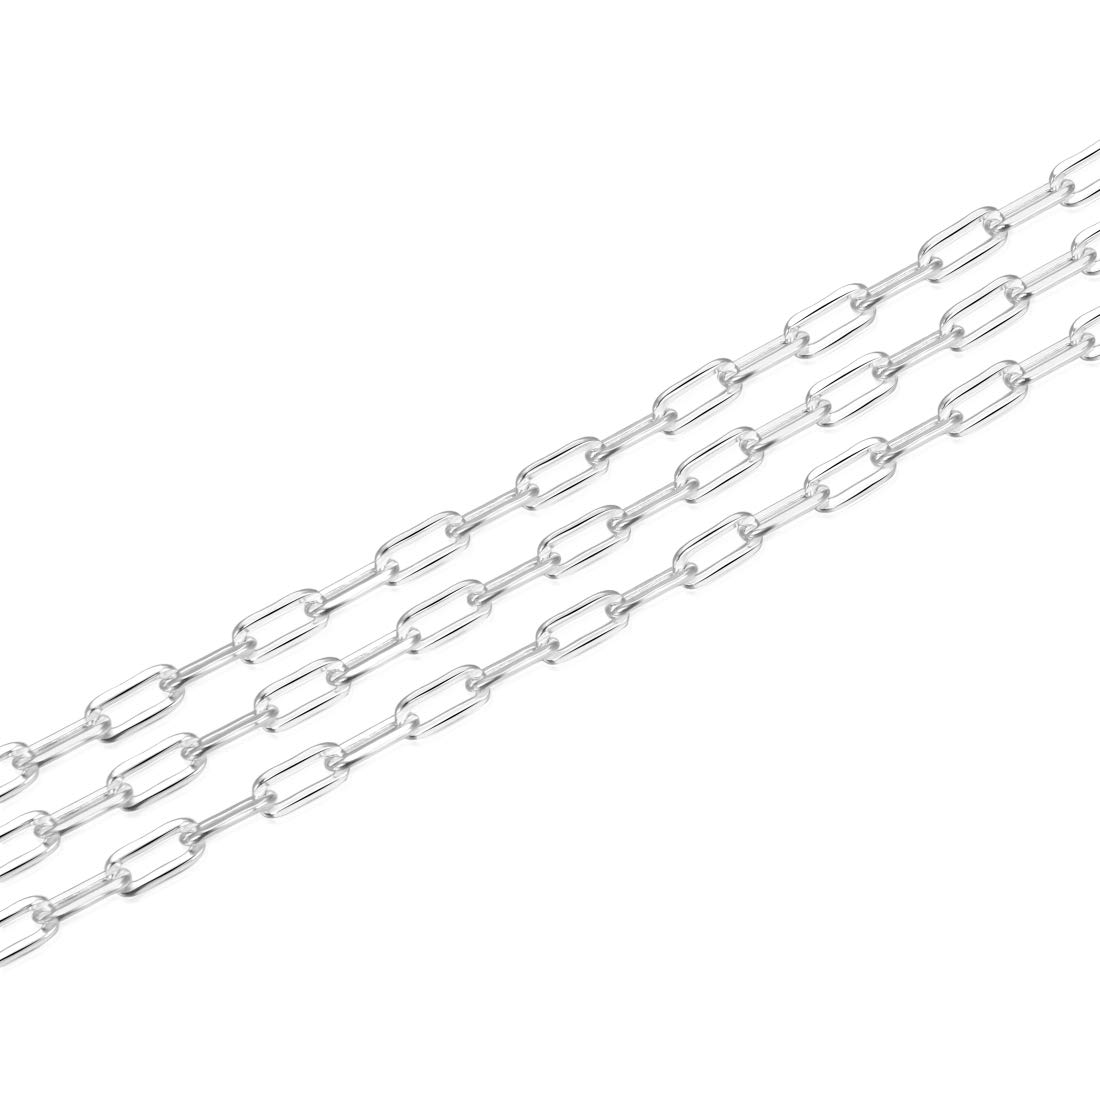 Adabele 5 Feet (60 Inch) Authentic 925 Sterling Silver Unfinished 2.5mm (0.1 Inch) Paperclip Link Drawn Cable Chain for Jewelry Making Nickel Free Hypoallergenic SSK-D1